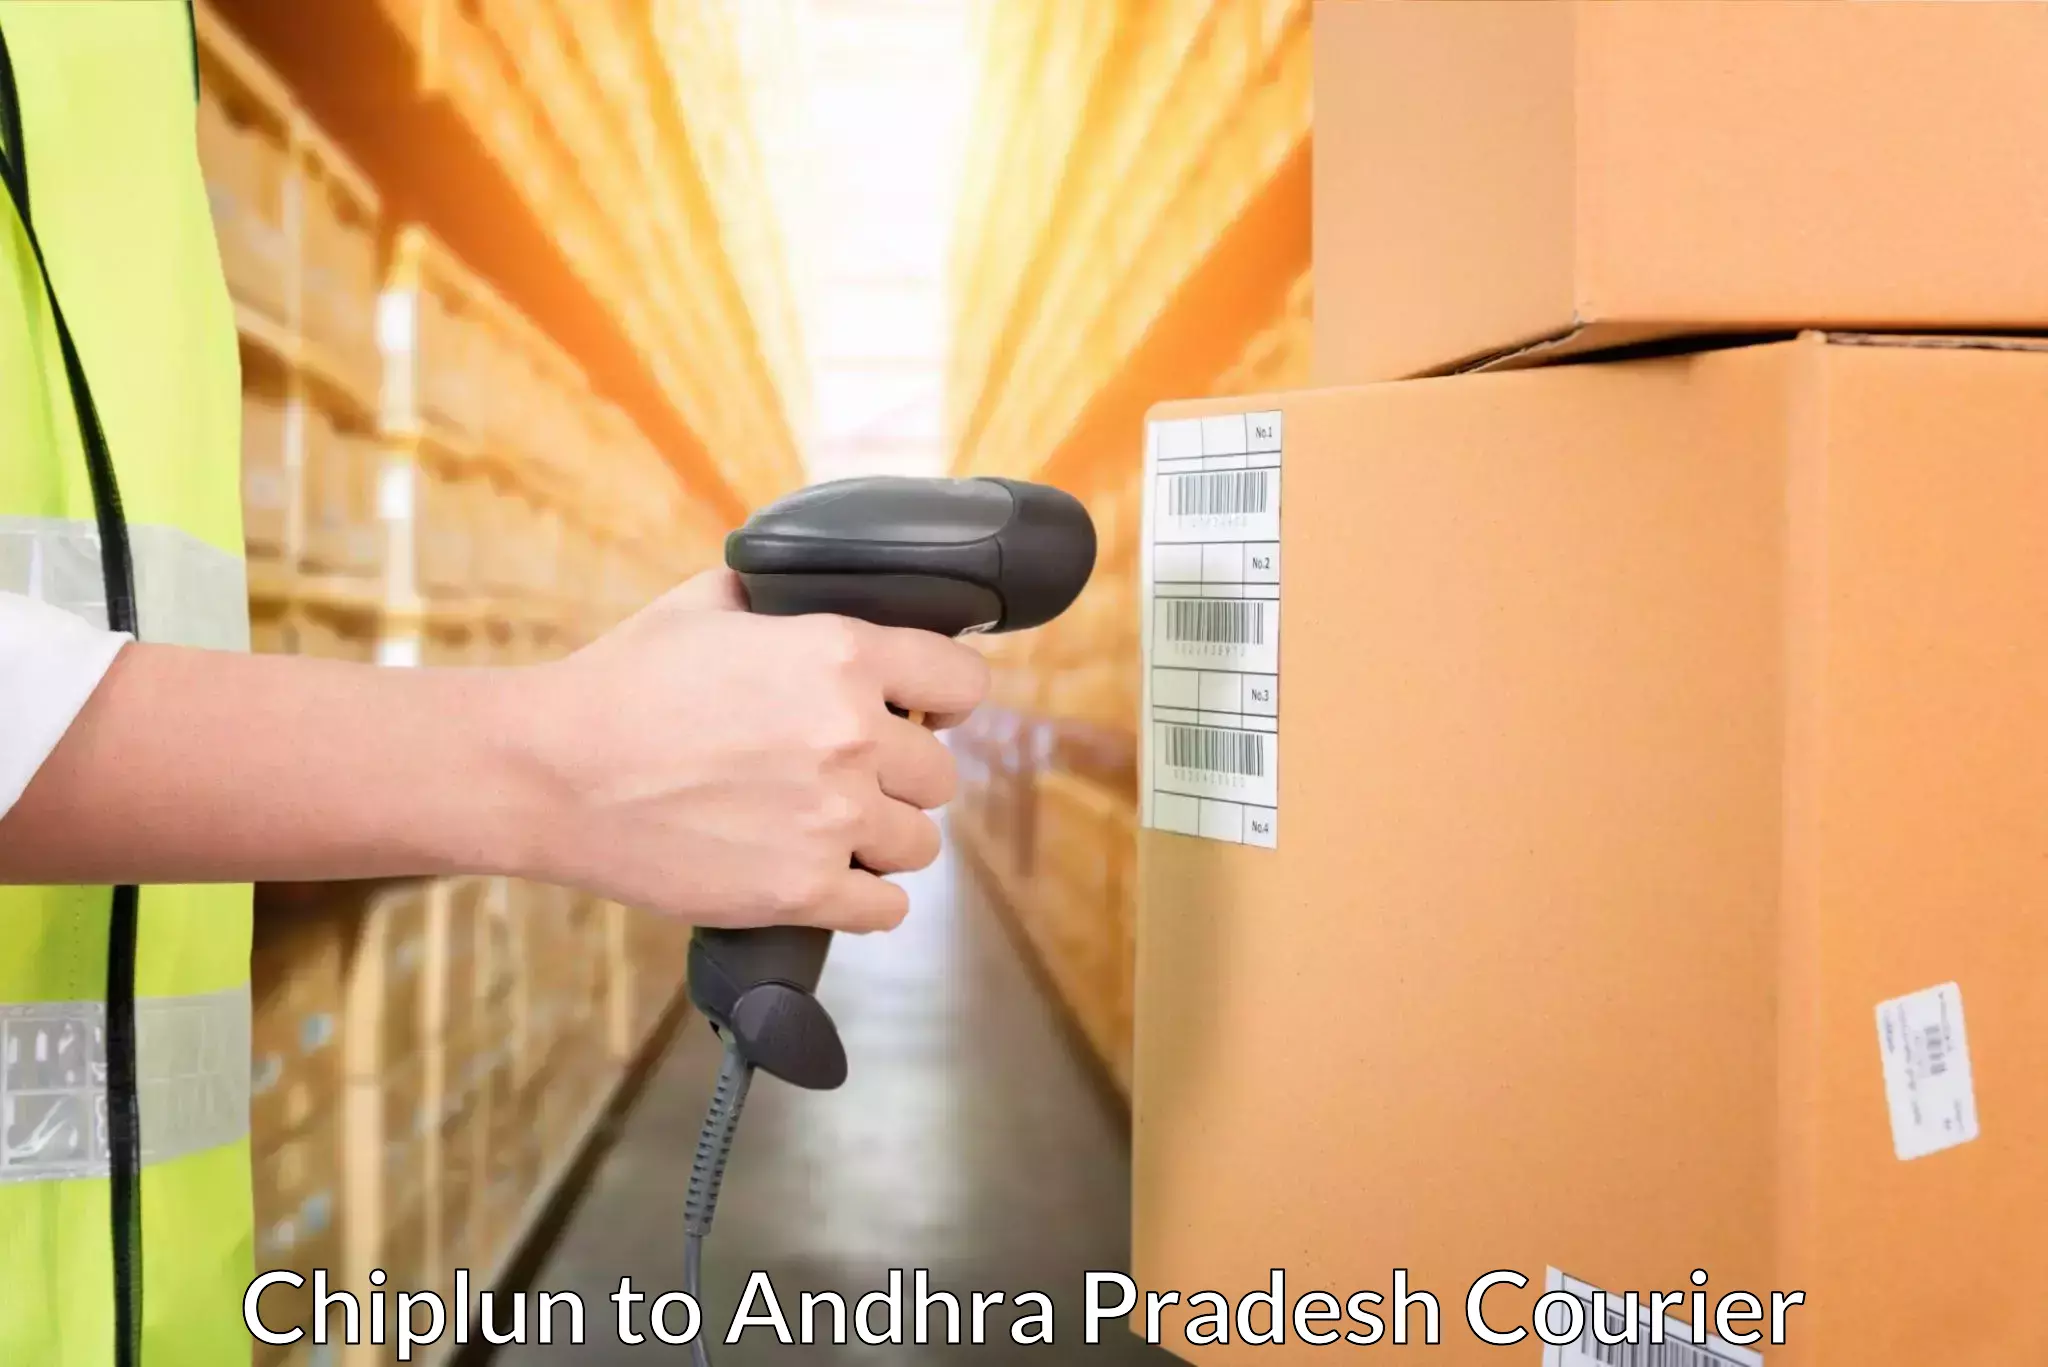 Multi-service courier options Chiplun to Bhattiprolu